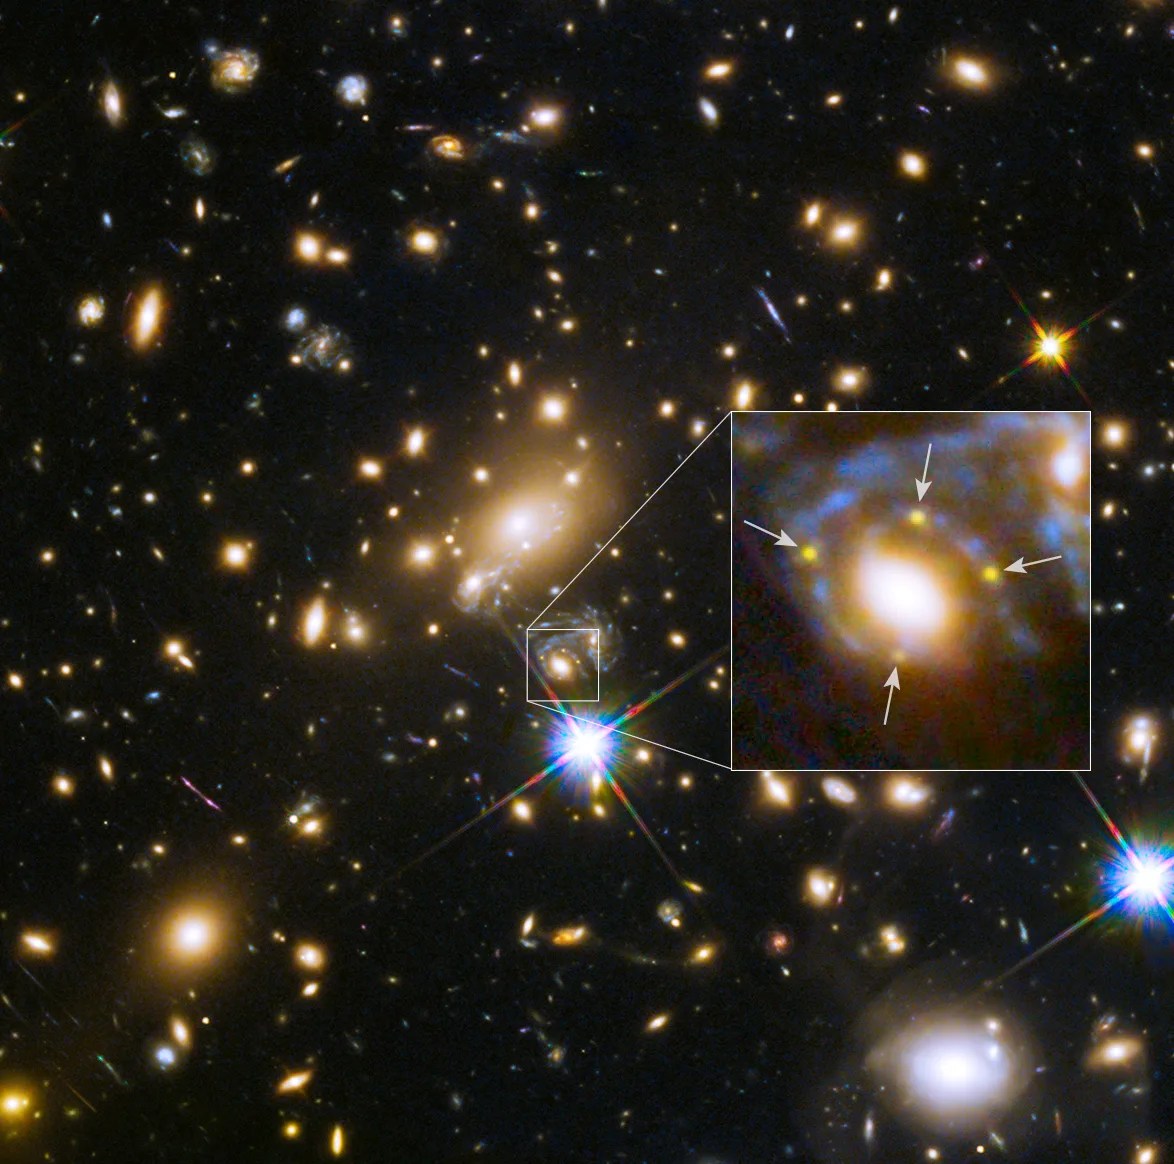 A galaxy field with a callout box zooming into an elliptical galaxy. Four bright yellow dots, the muliptle images of the supernovae, are indicated with arrows.